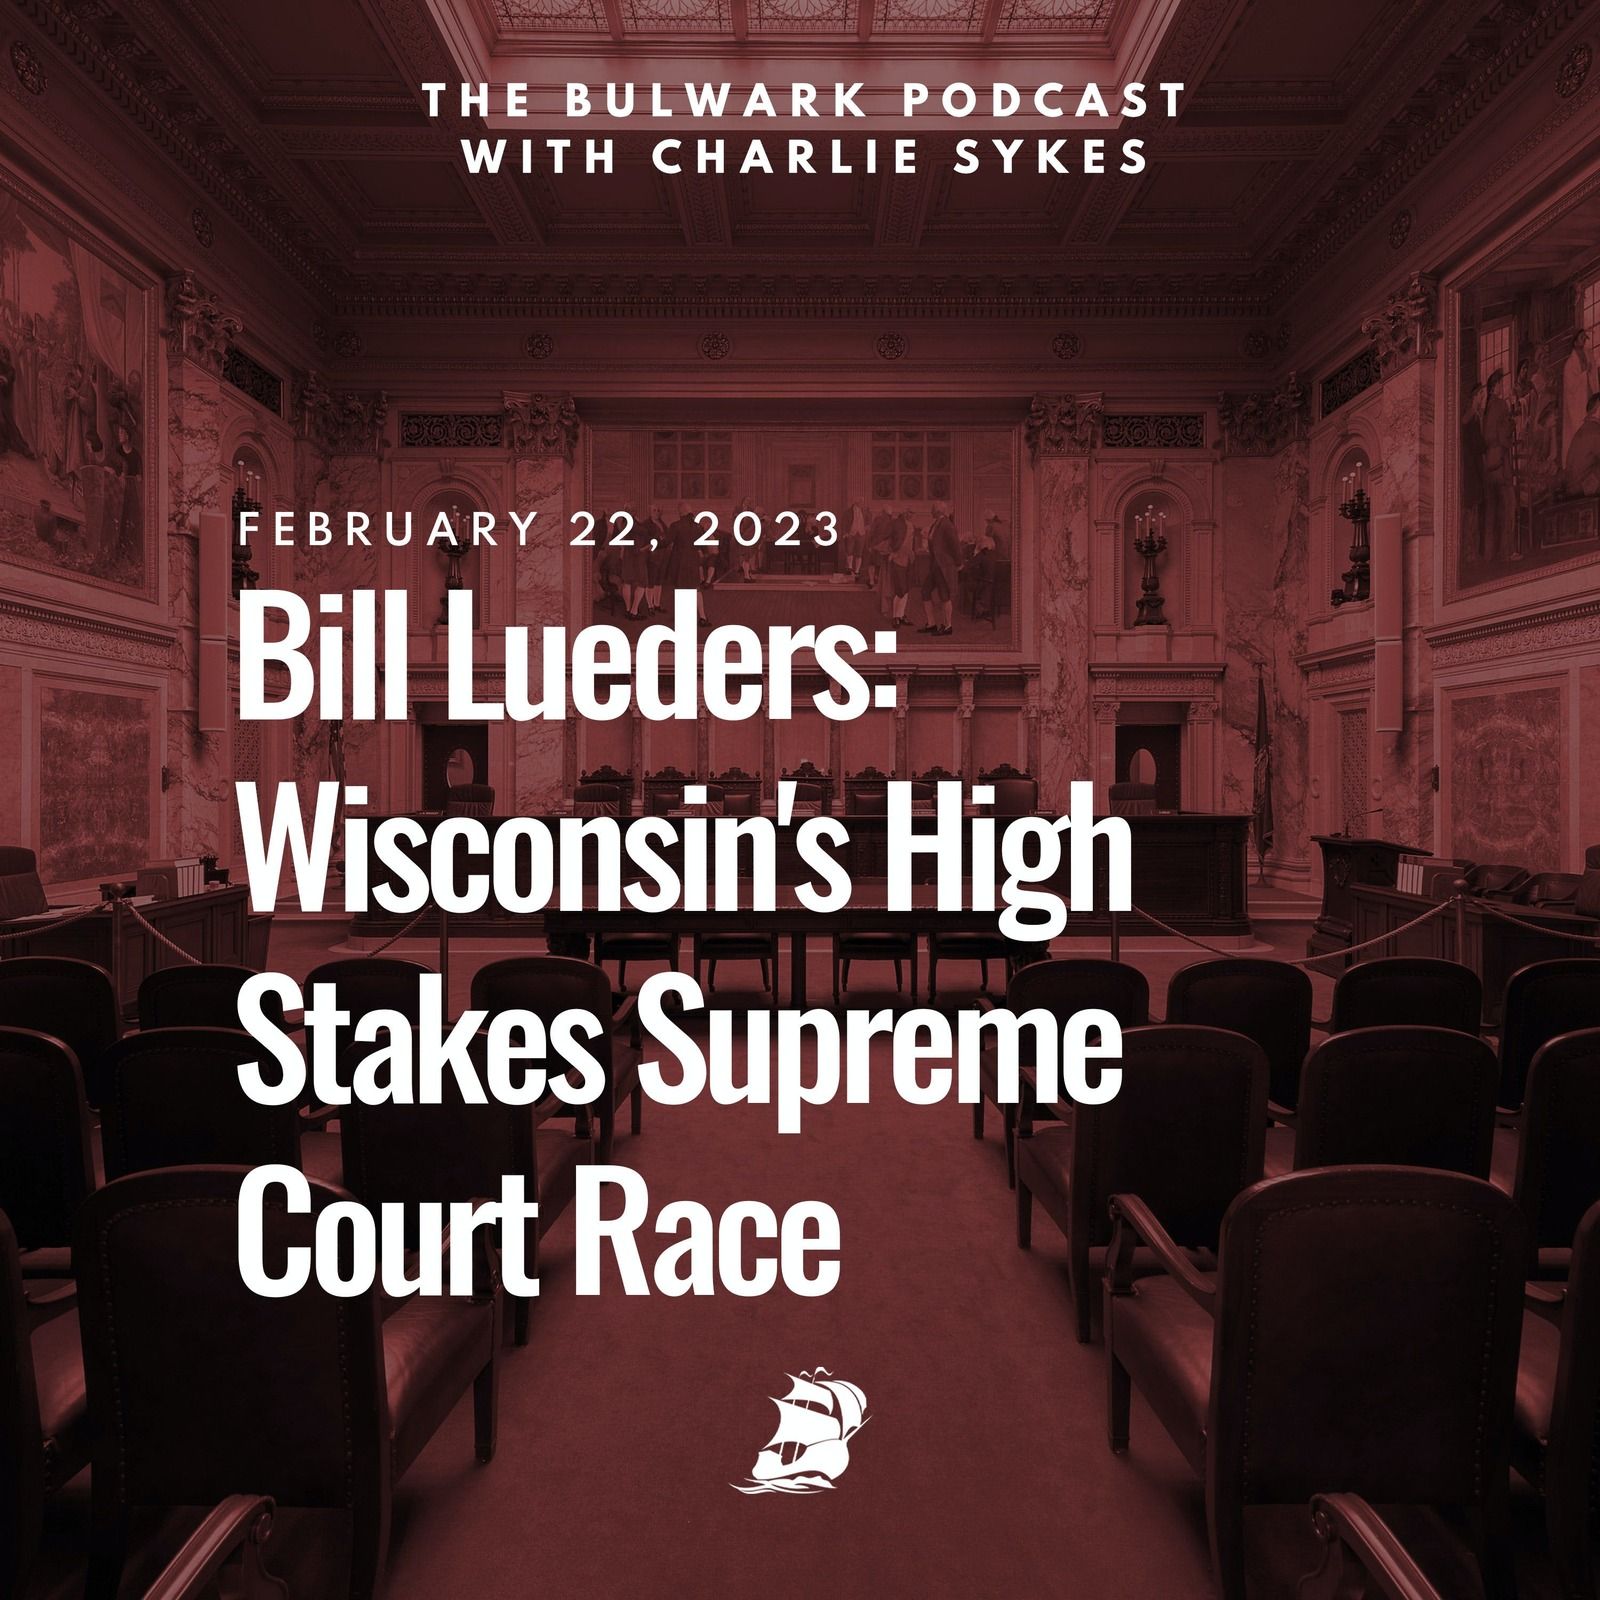 Bill Lueders: Wisconsin's High Stakes Supreme Court Race 